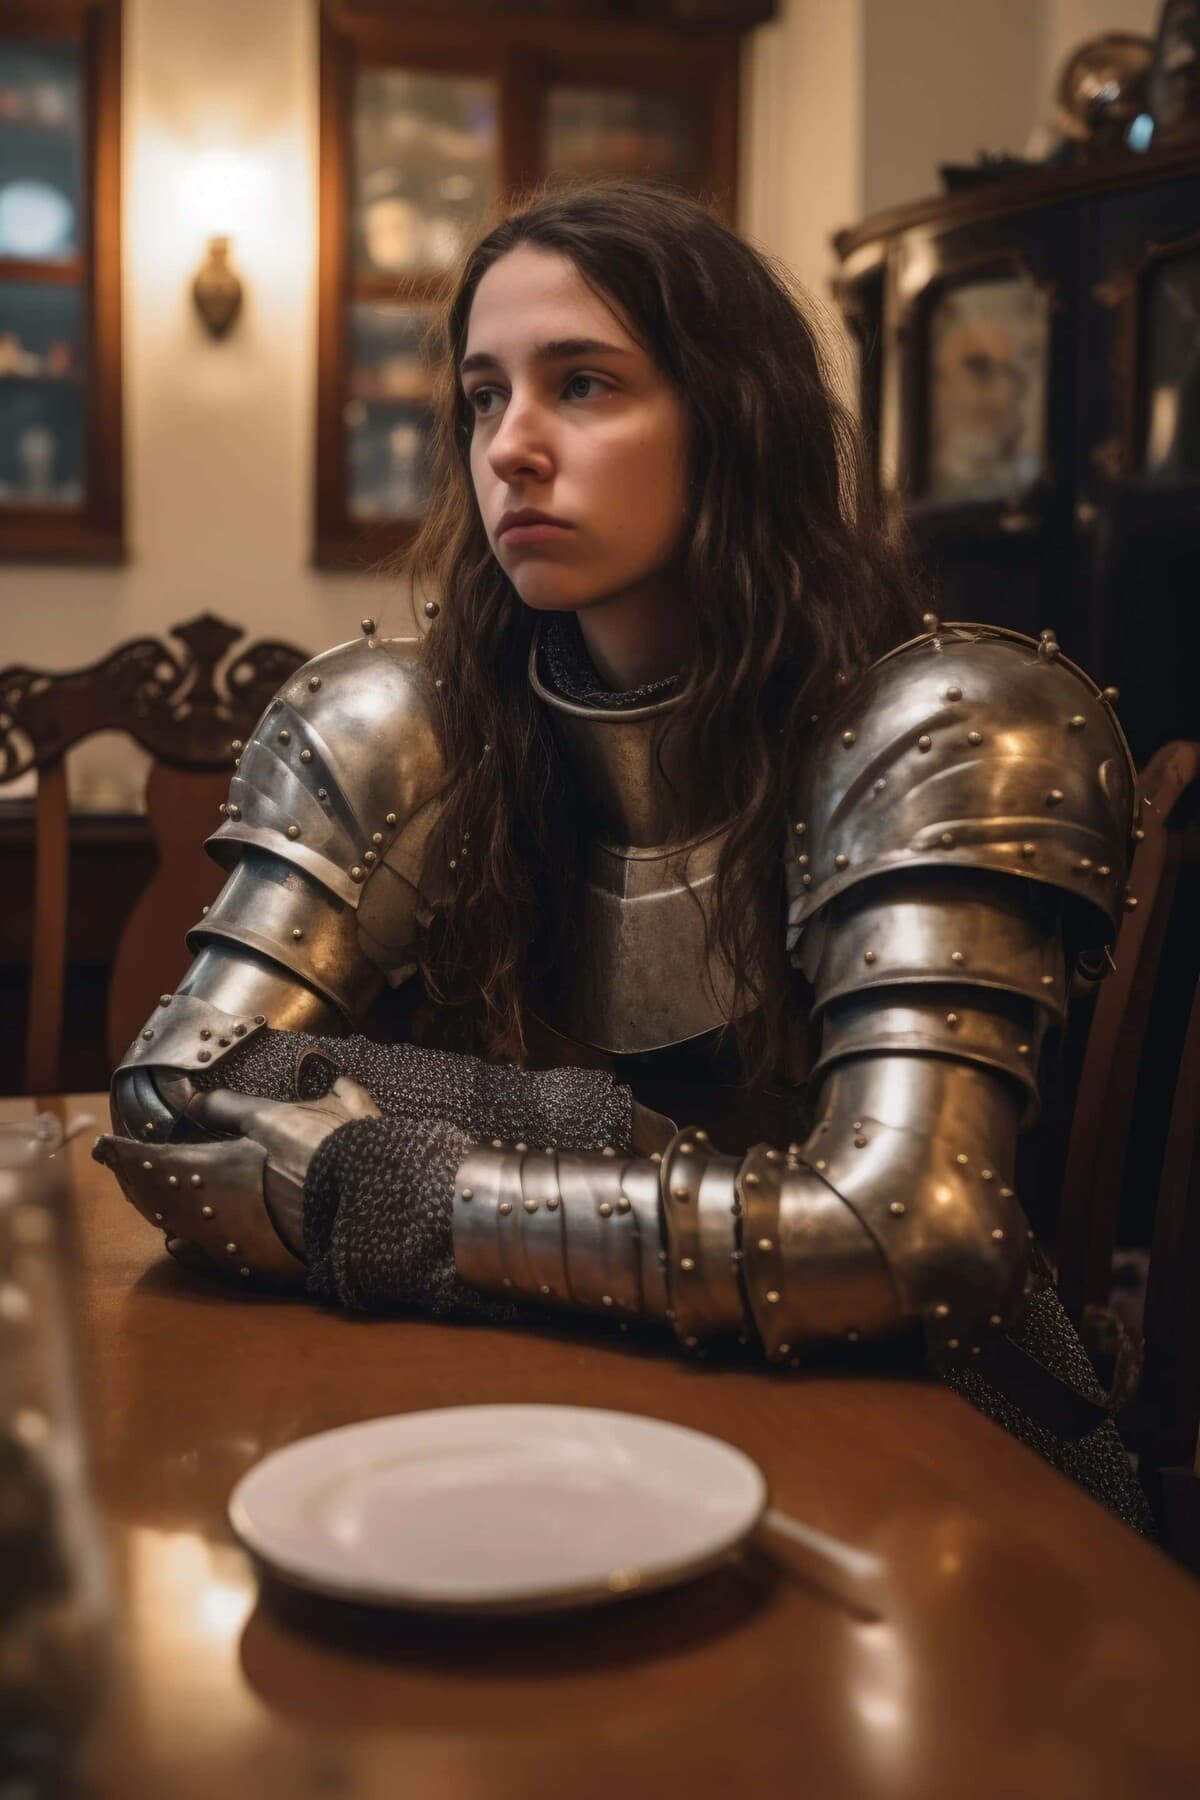 Woman wearing medieval armor at dinner table